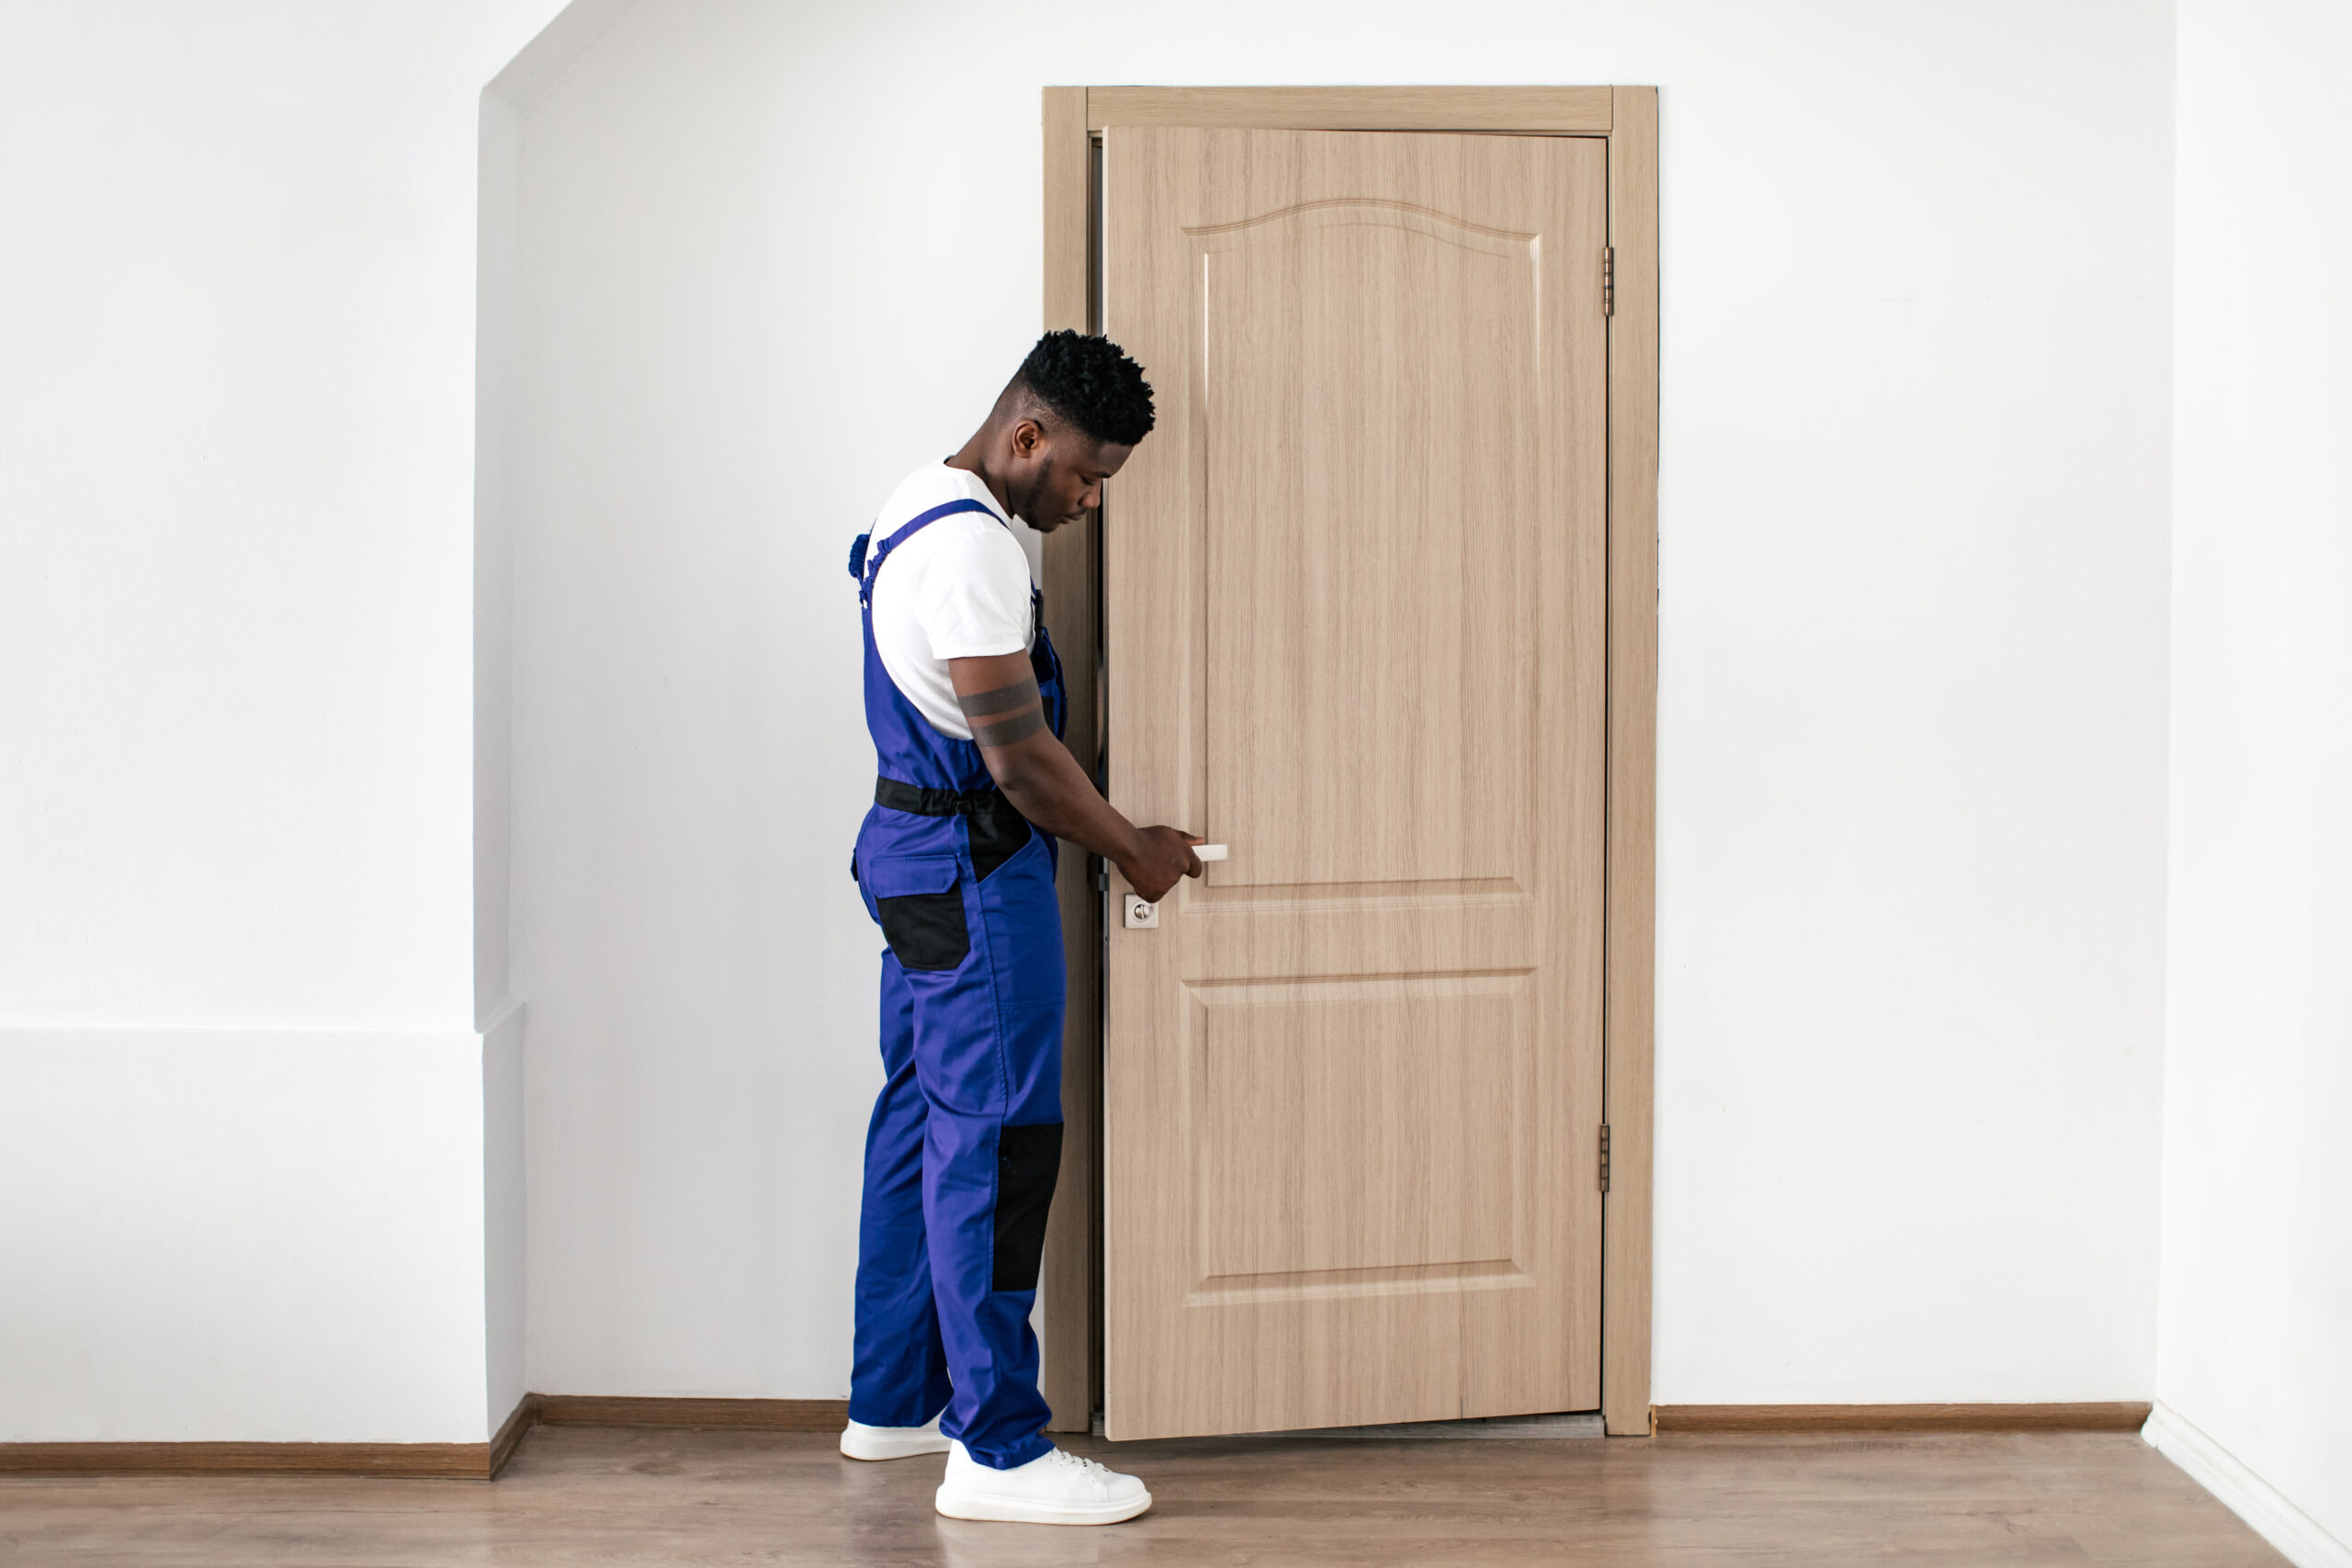 Repair Service. Black Repairman Installing New Entry Door, Fixing Lock And Handle Working Wearing Blue Coverall Uniform In Flat Indoor. Male Renovation Concept. Full Length Shot